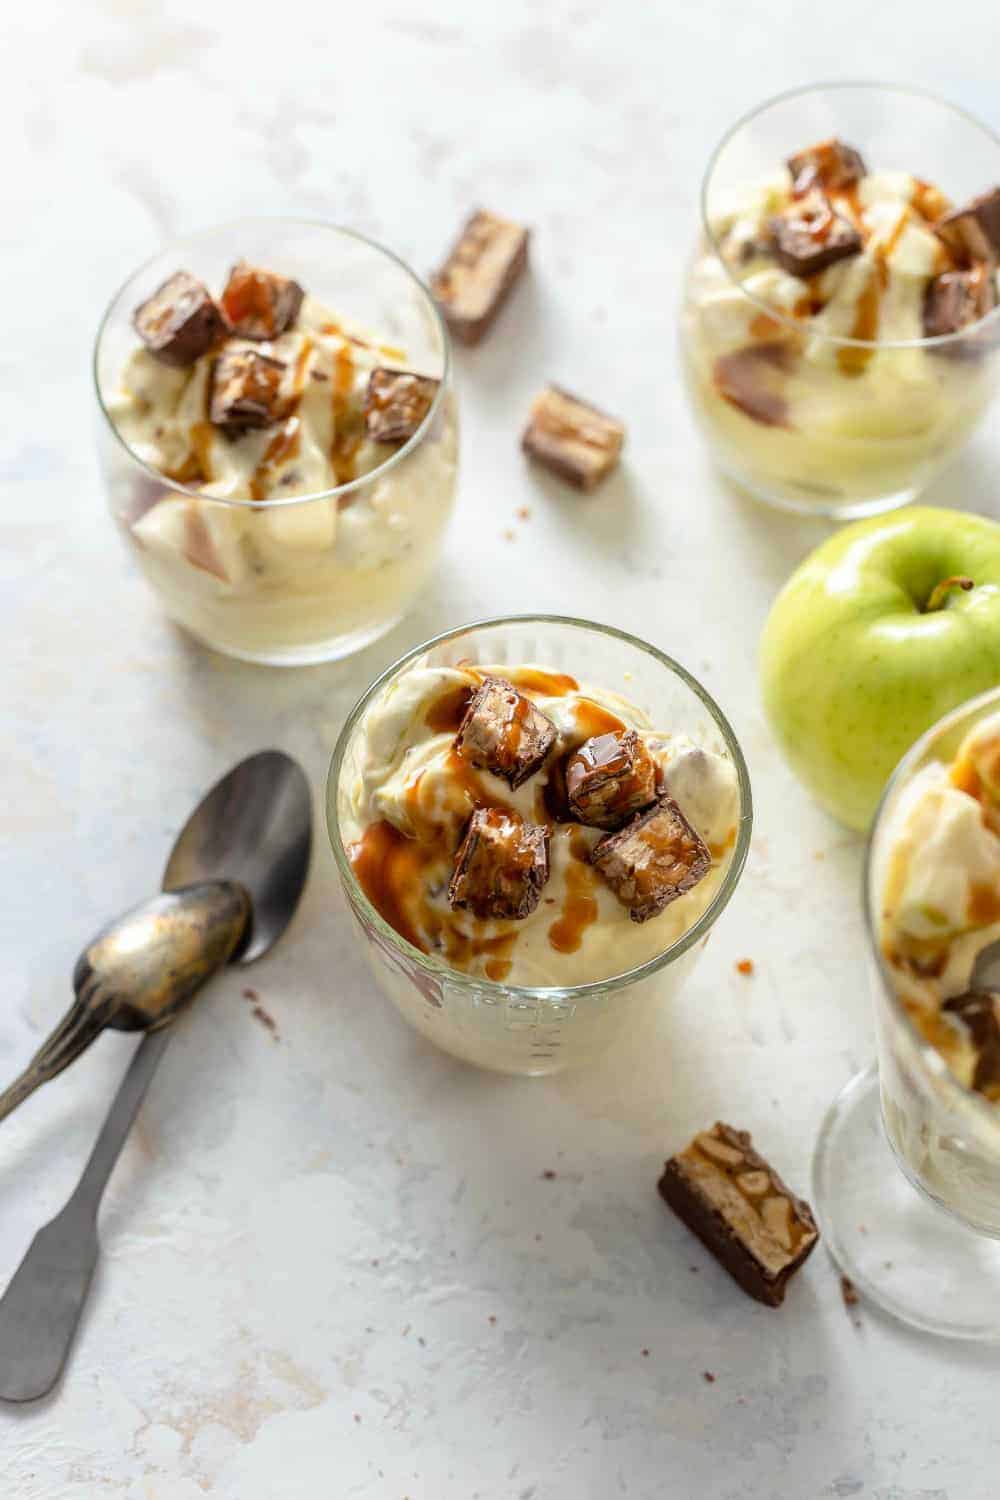 Servings of caramel apple salad with Snickers and apples